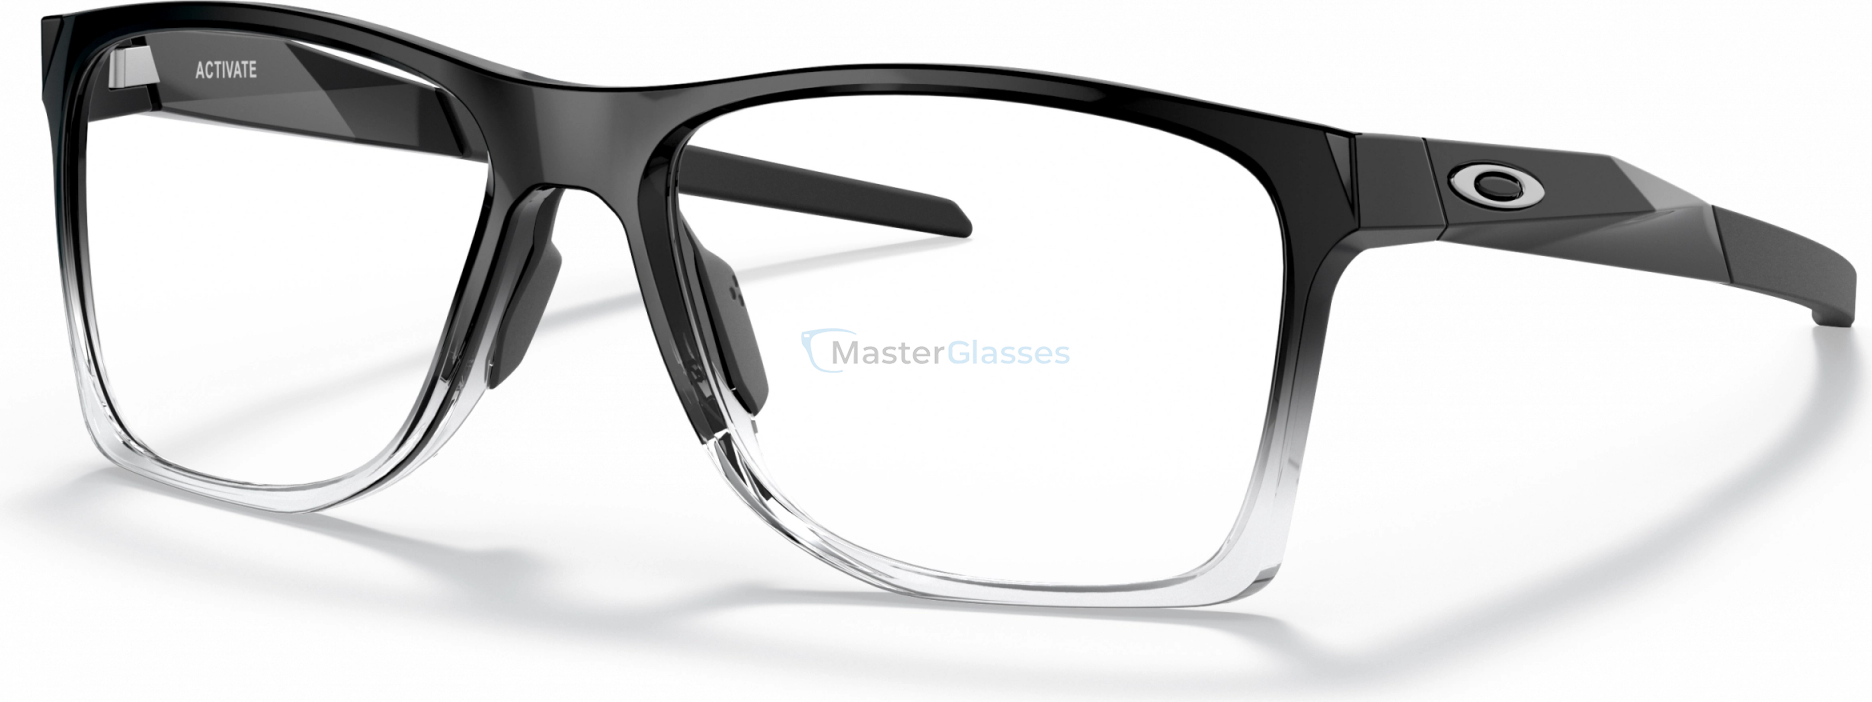  Oakley Activate OX8173 817304 Polished Black Fade